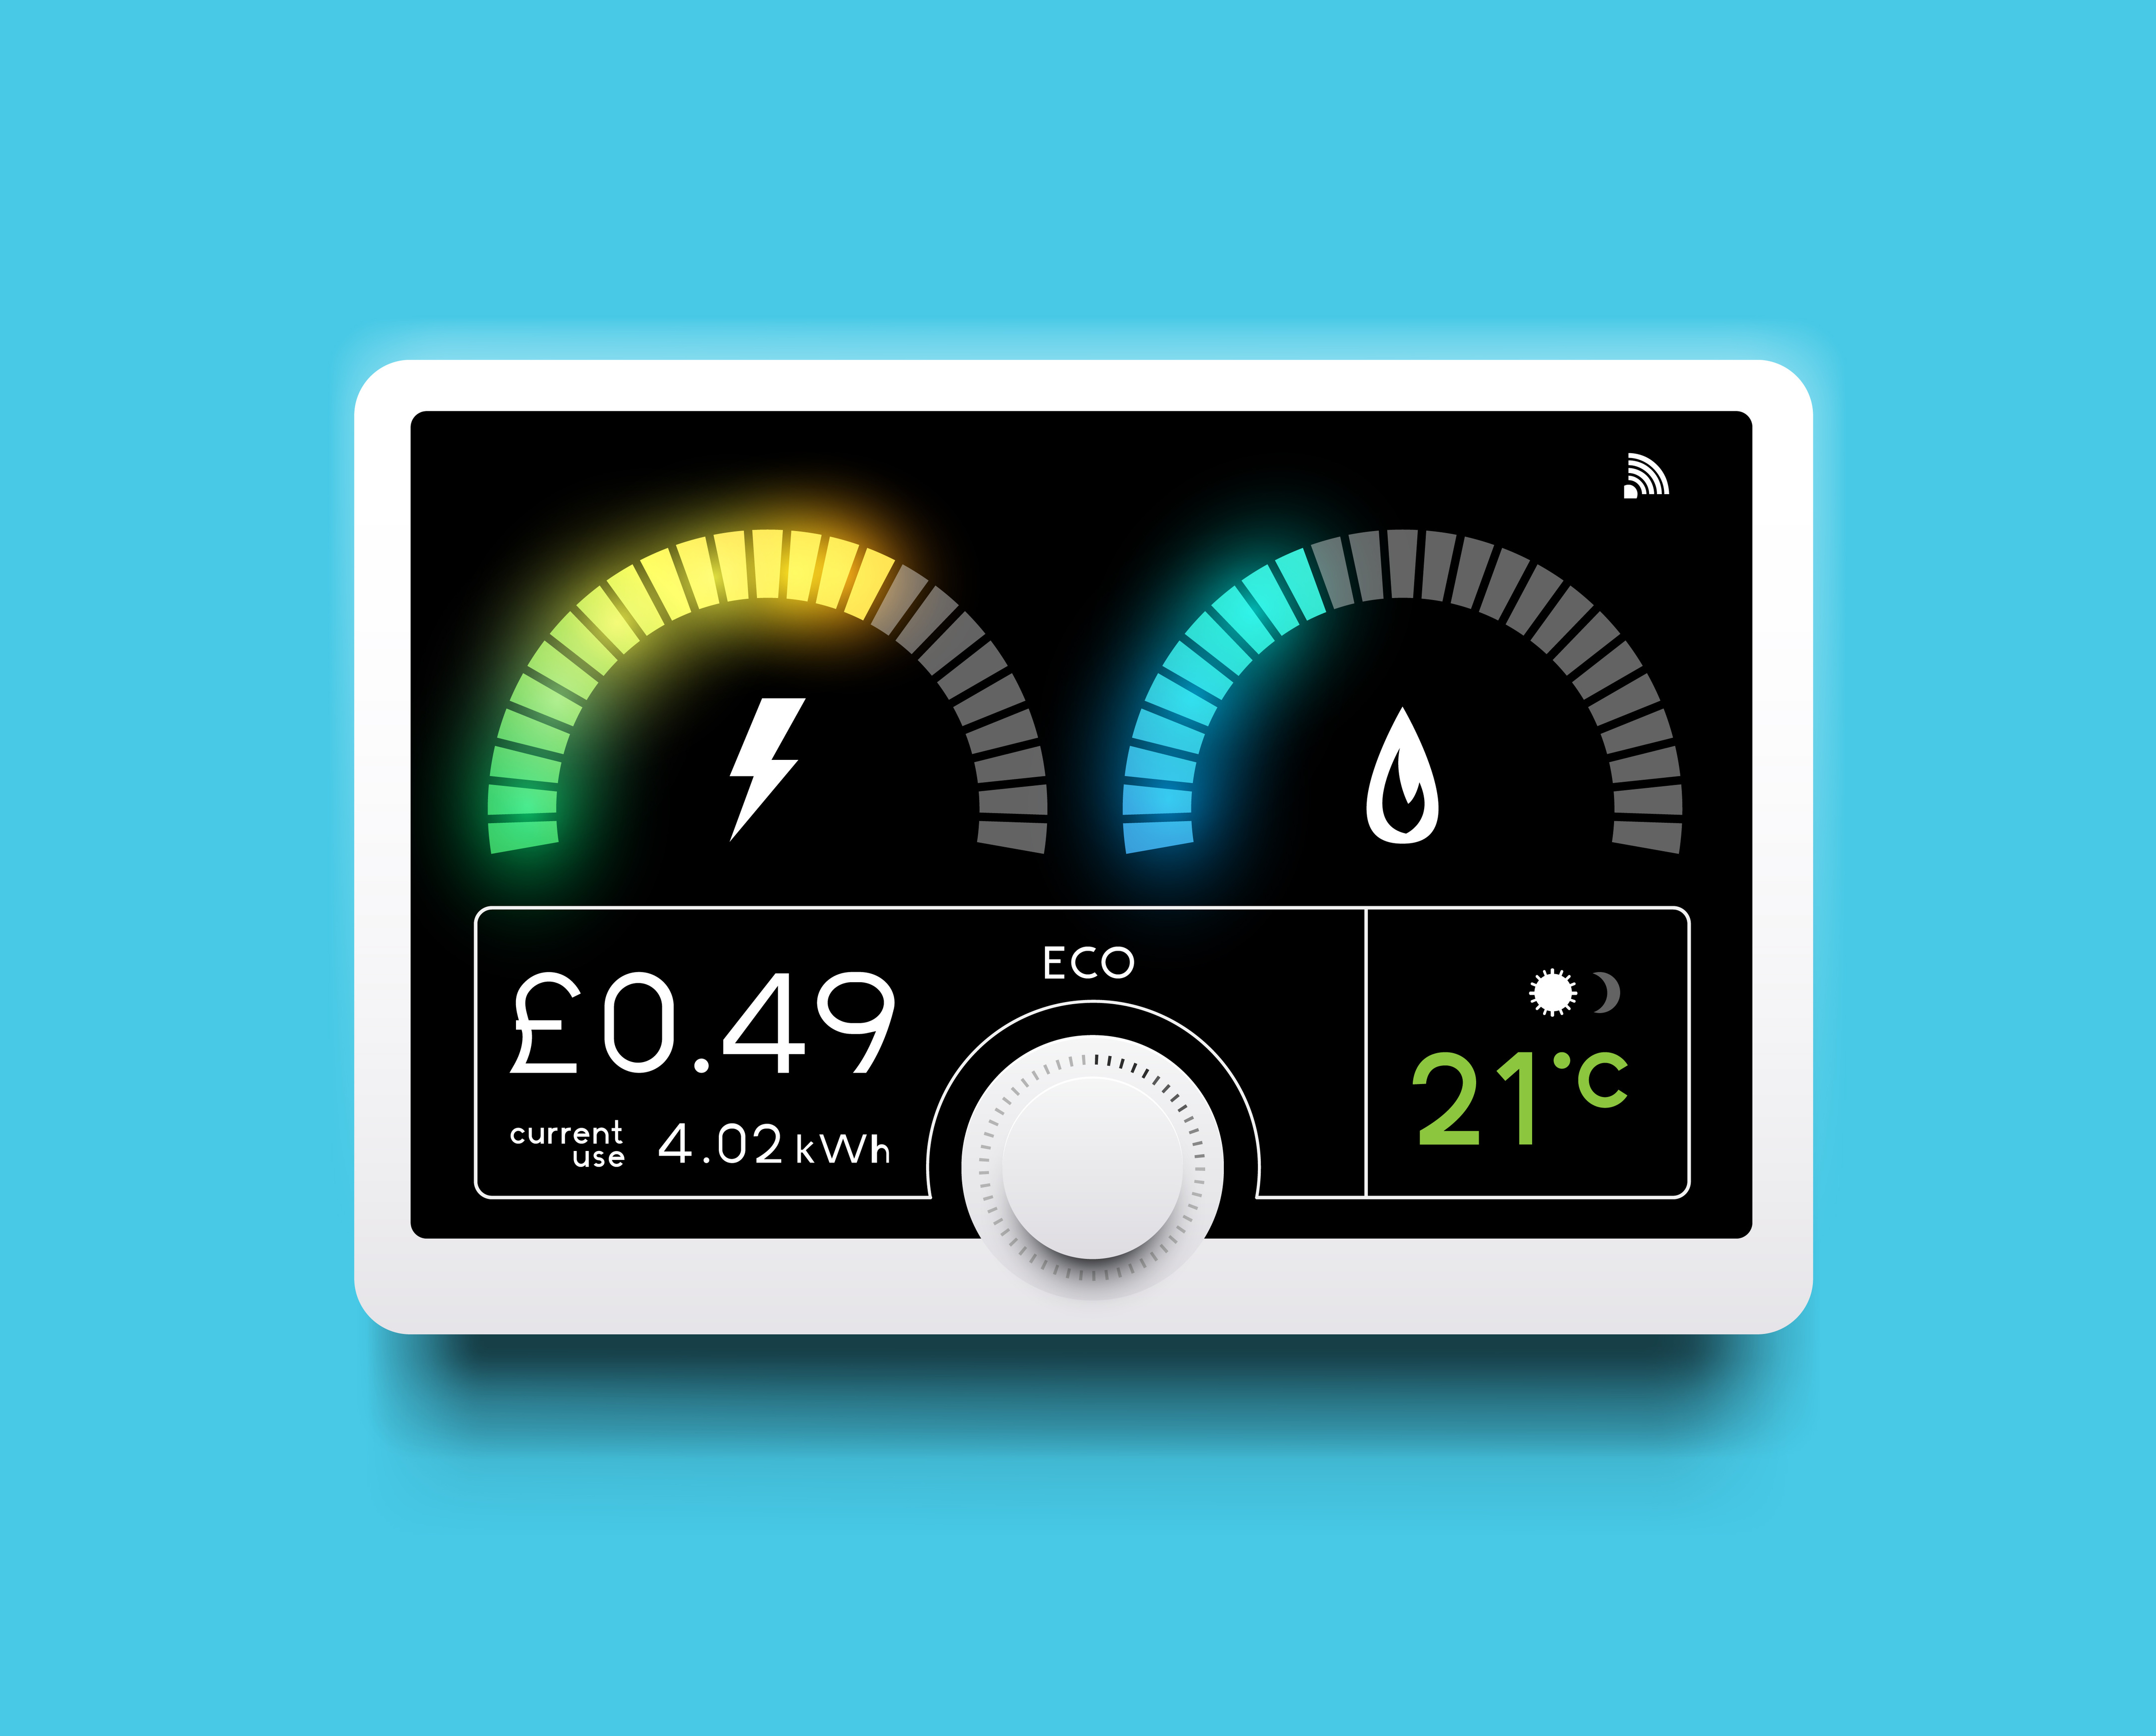 How we can help solve the problem of smart meters that aren’t functioning properly